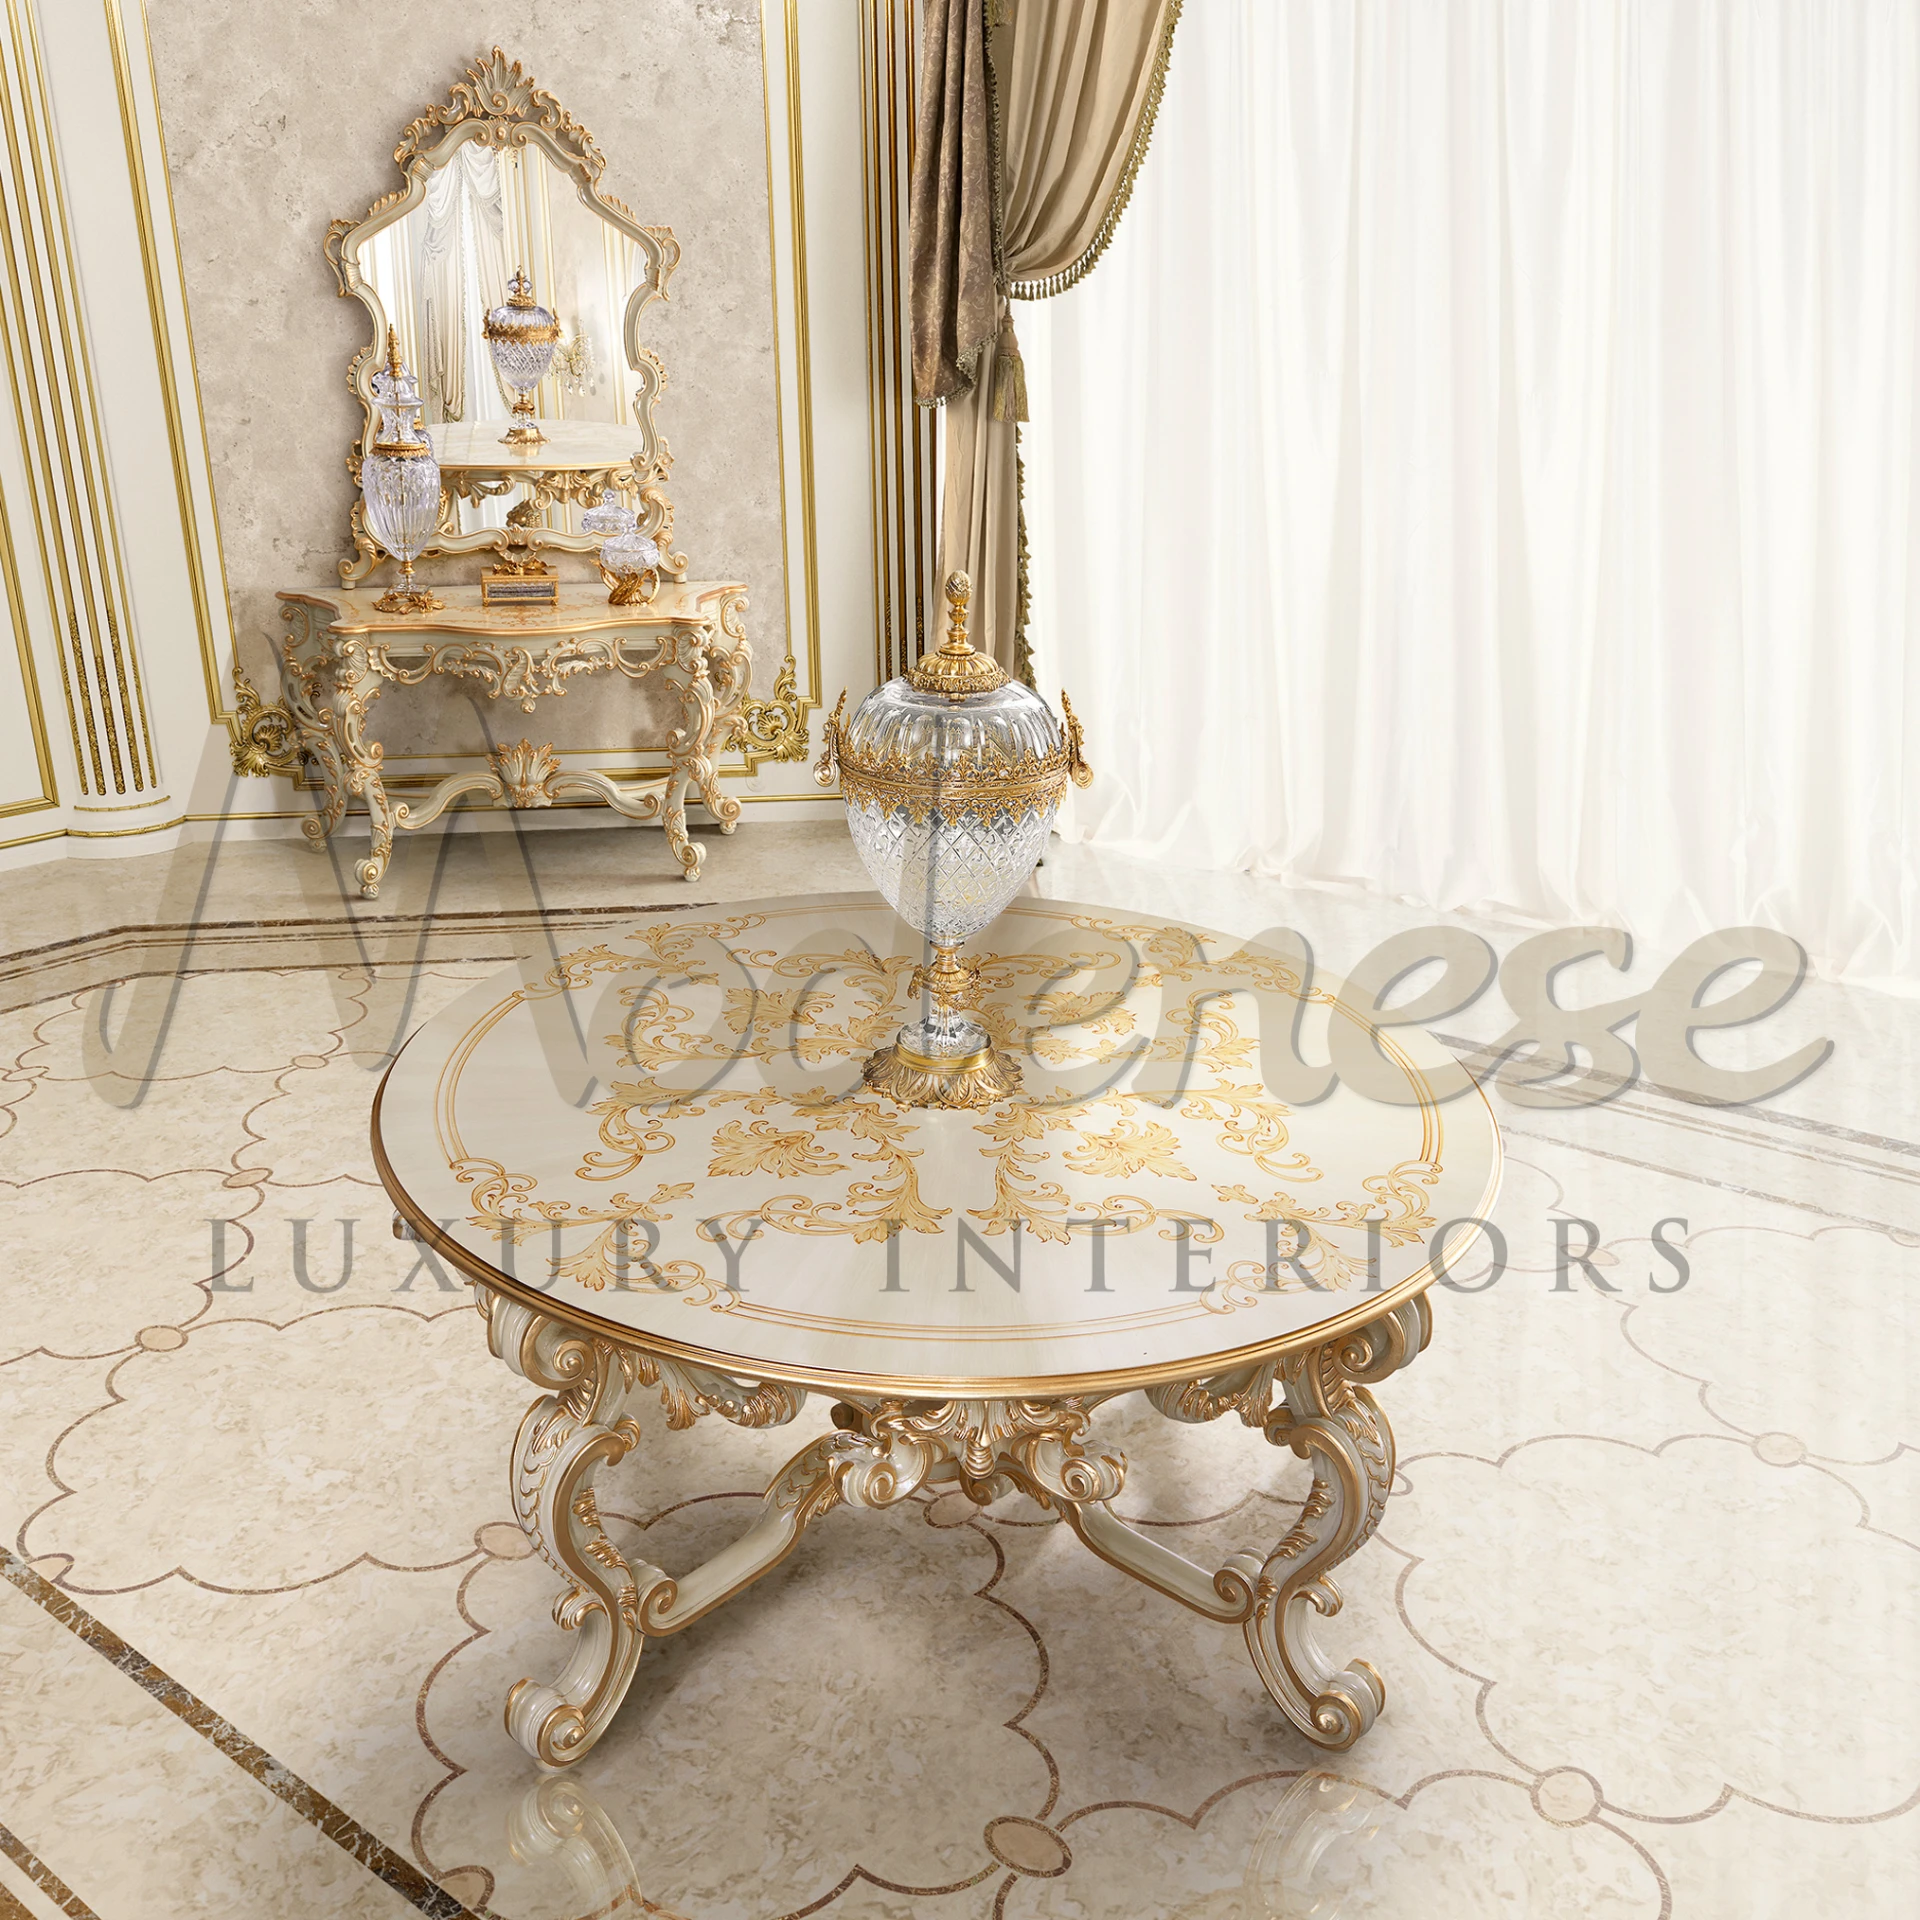 Timeless Victorian Central Table, a classical collection piece with Venetian flair, baroque design, and superior ivory and gold leaf finishing.
